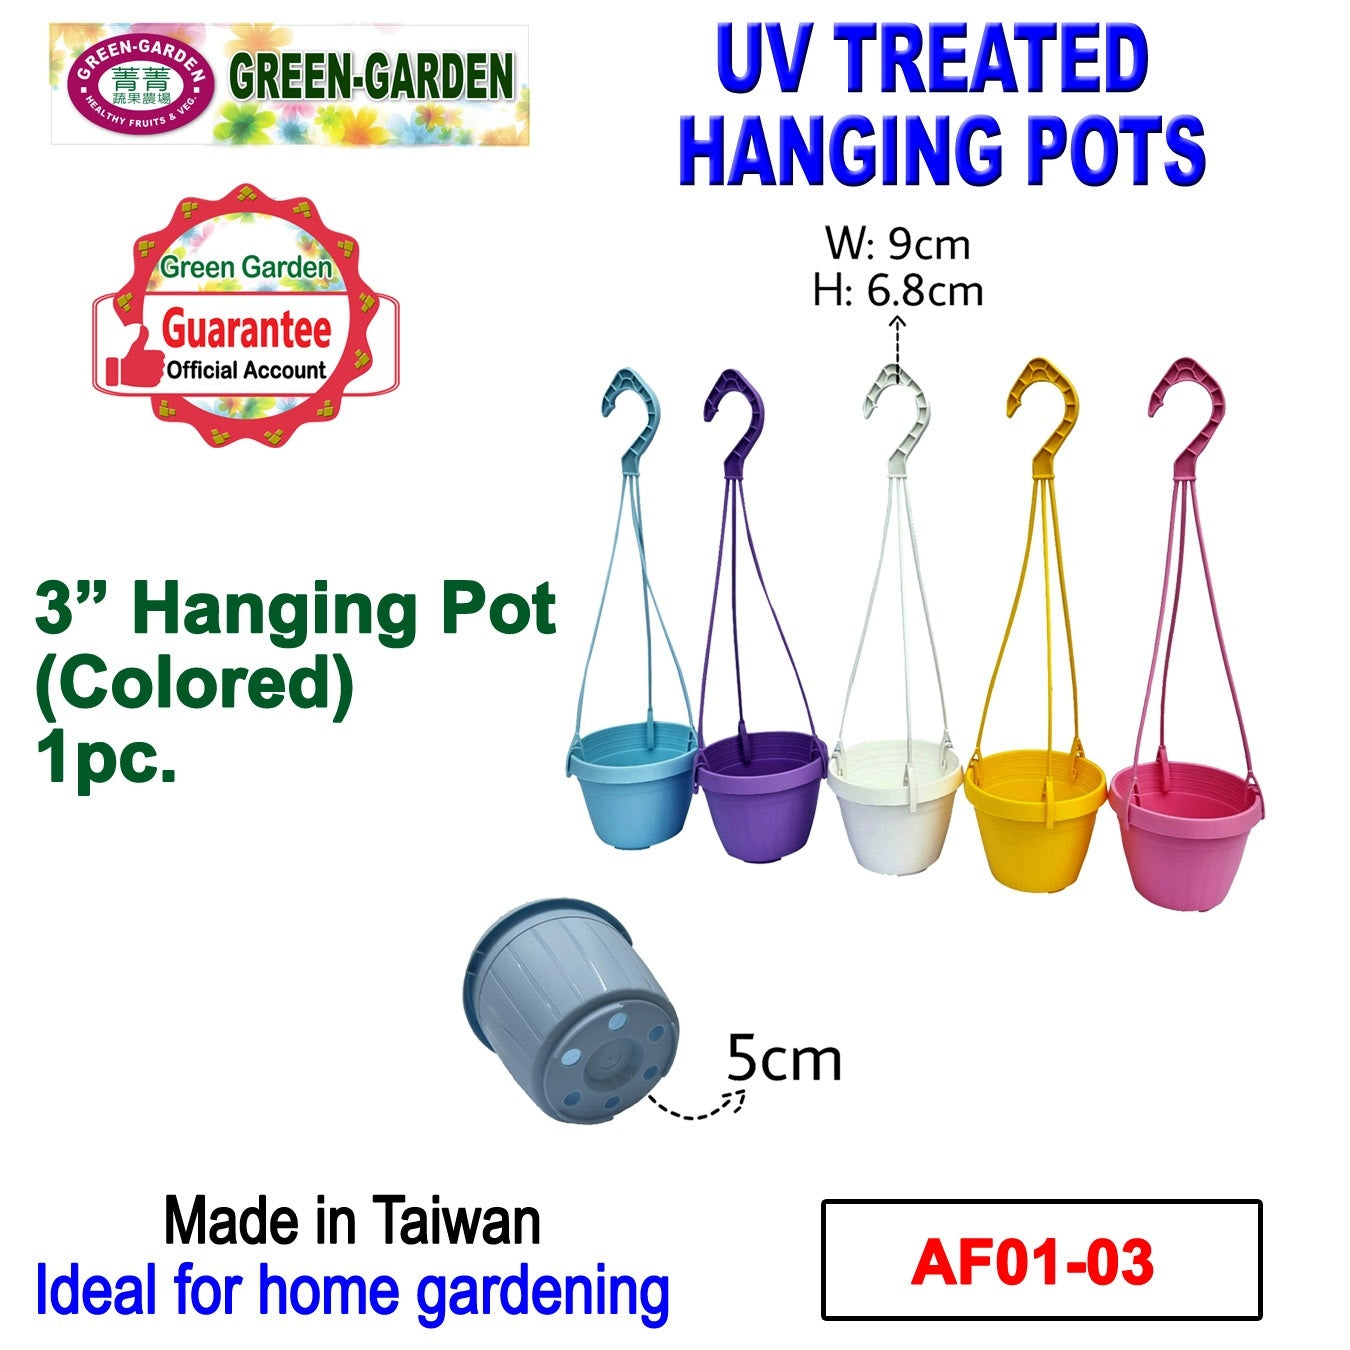 UV TREATED Colored Hanging Pot 3"